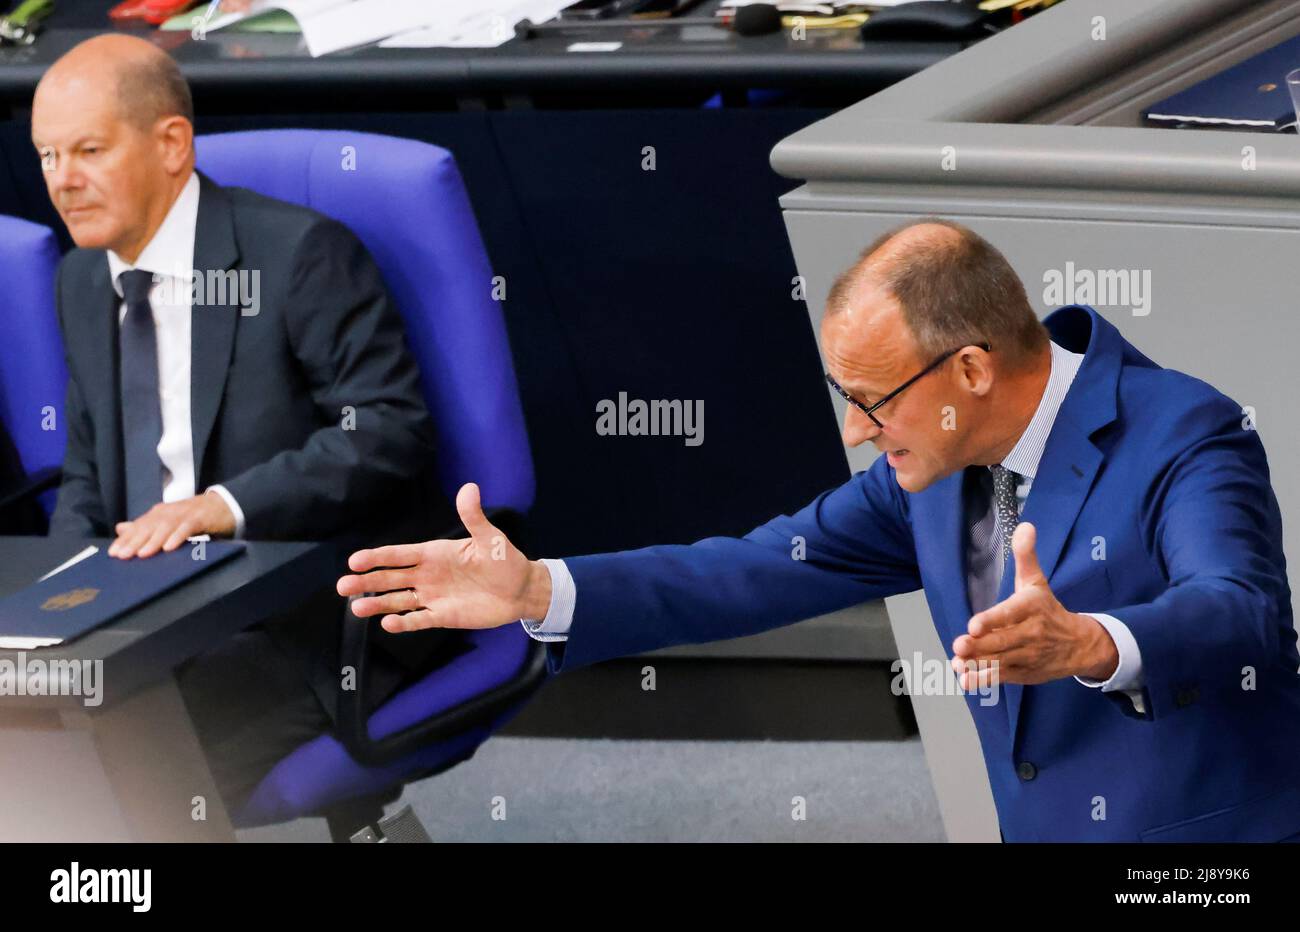 Leader of Germany's Christian Democratic Union (CDU) Friedrich Merz speaks as German Chancellor Olaf Scholz listens during a session of Germany's lower house of parliament, the Bundestag, in Berlin, Germany, May 19, 2022. REUTERS/Hannibal Hanschke Stock Photo